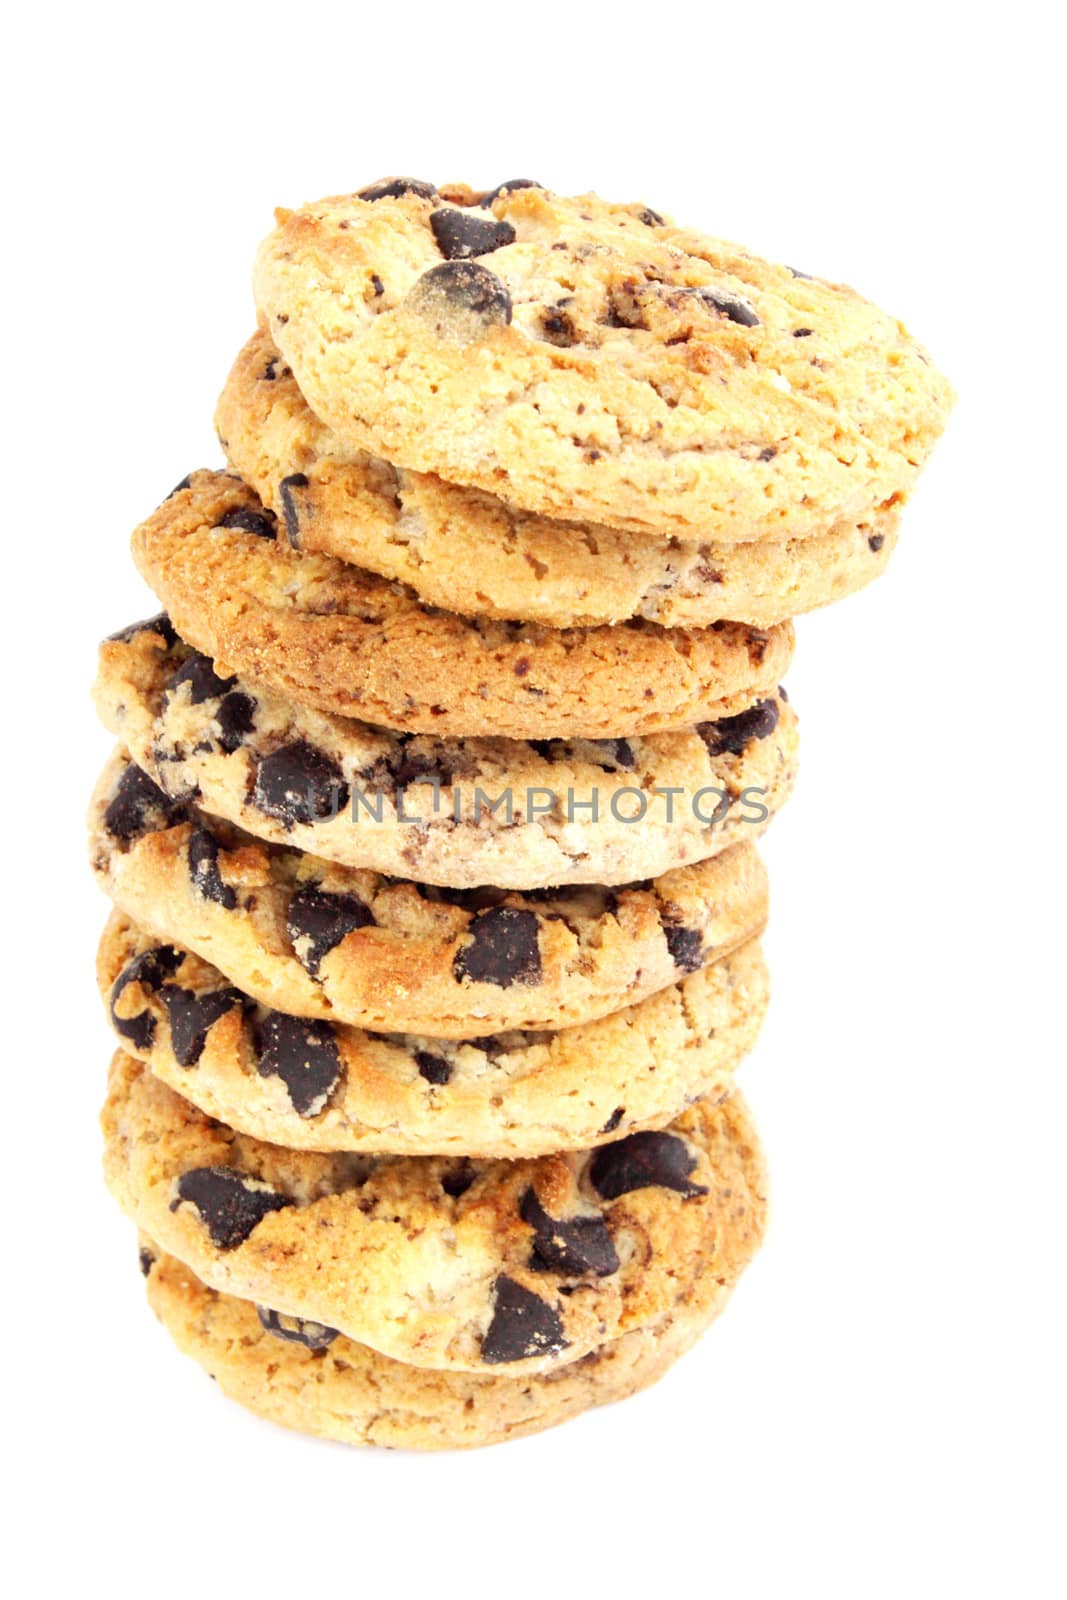 Pile from the  cookies with the chocolate crumb against the white background